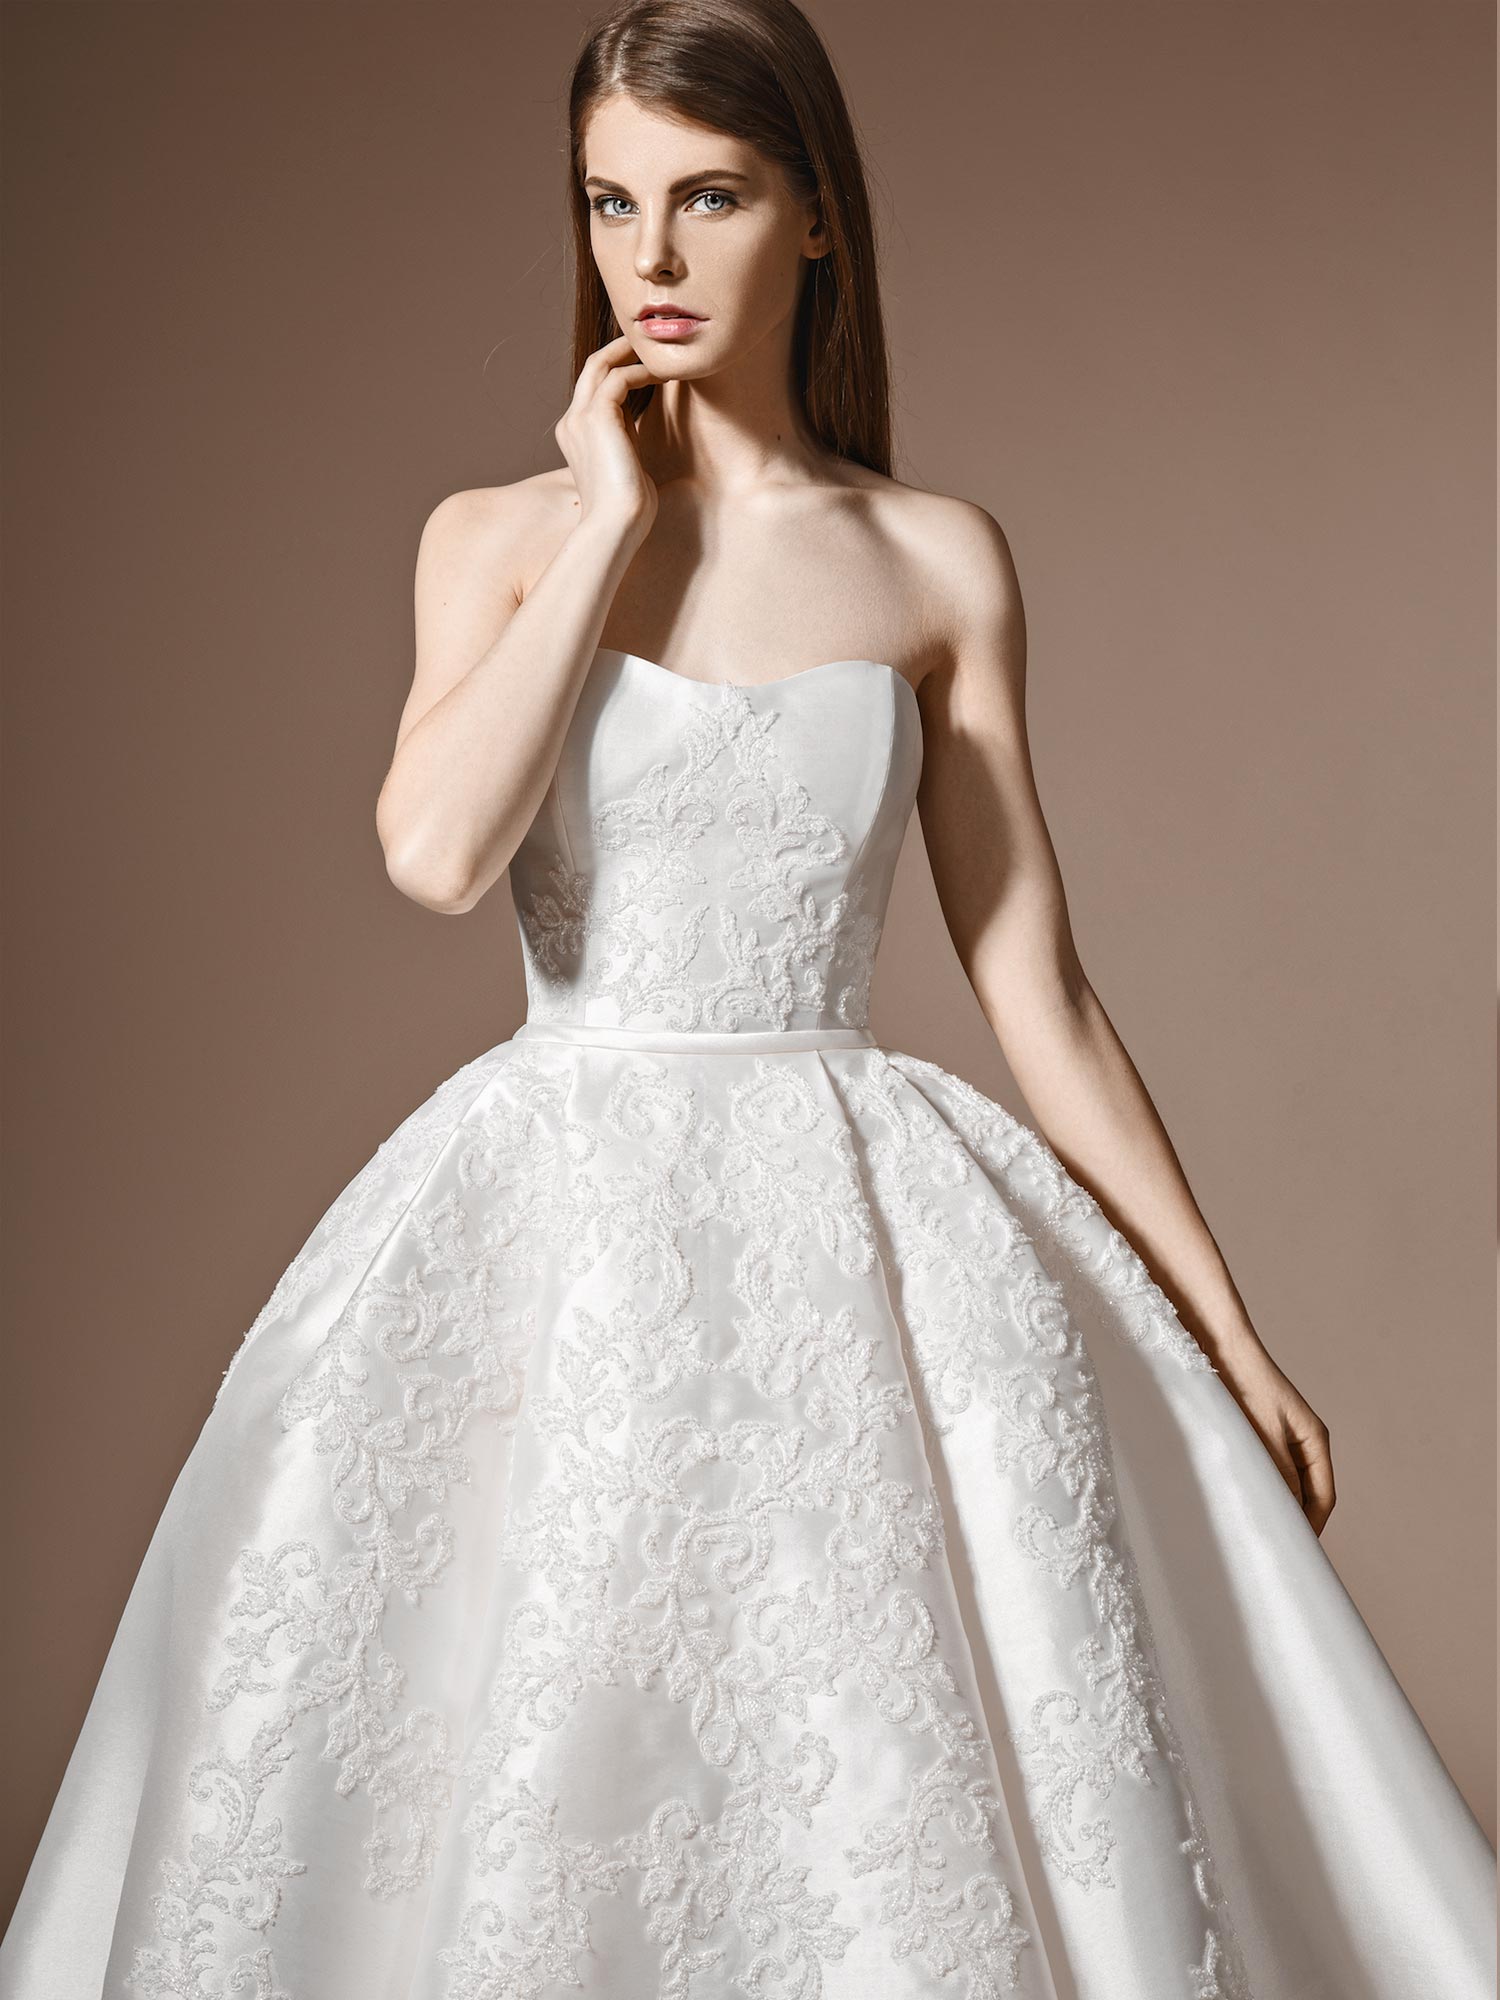 Papilio Sweetheart neckline ball gown wedding dress with embroidery